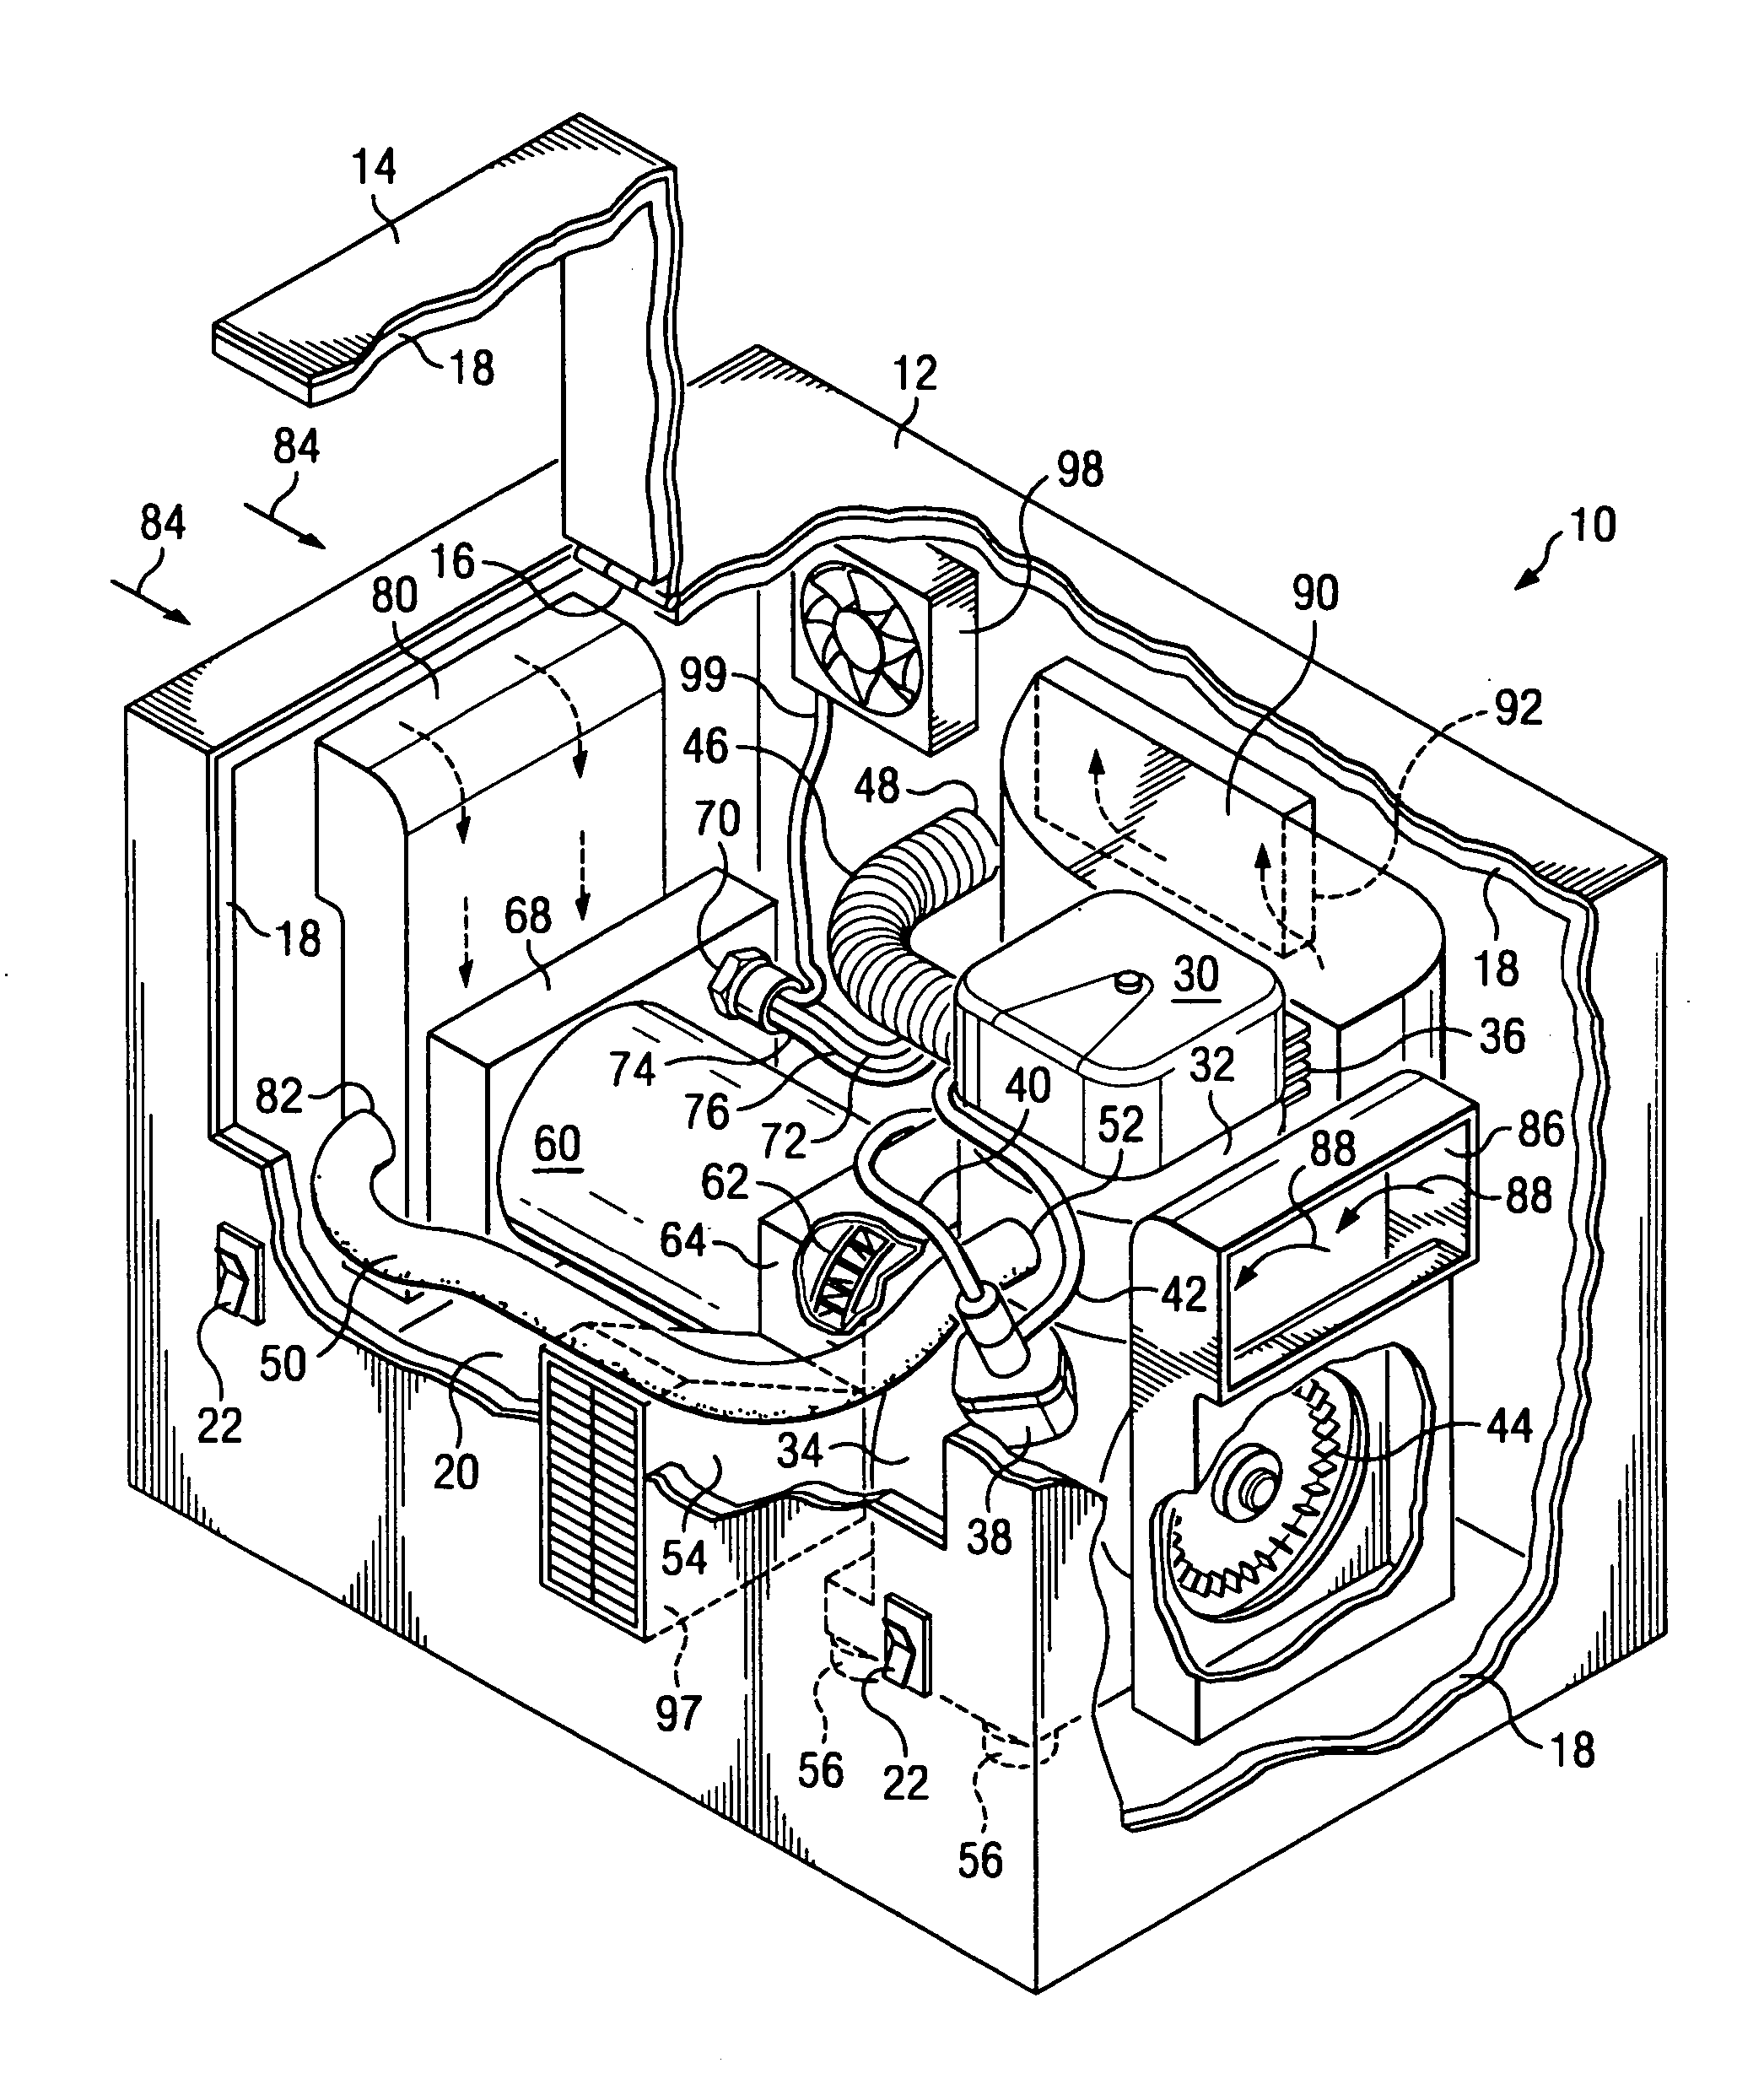 Auxiliary power unit for a diesel powered transport vehicle